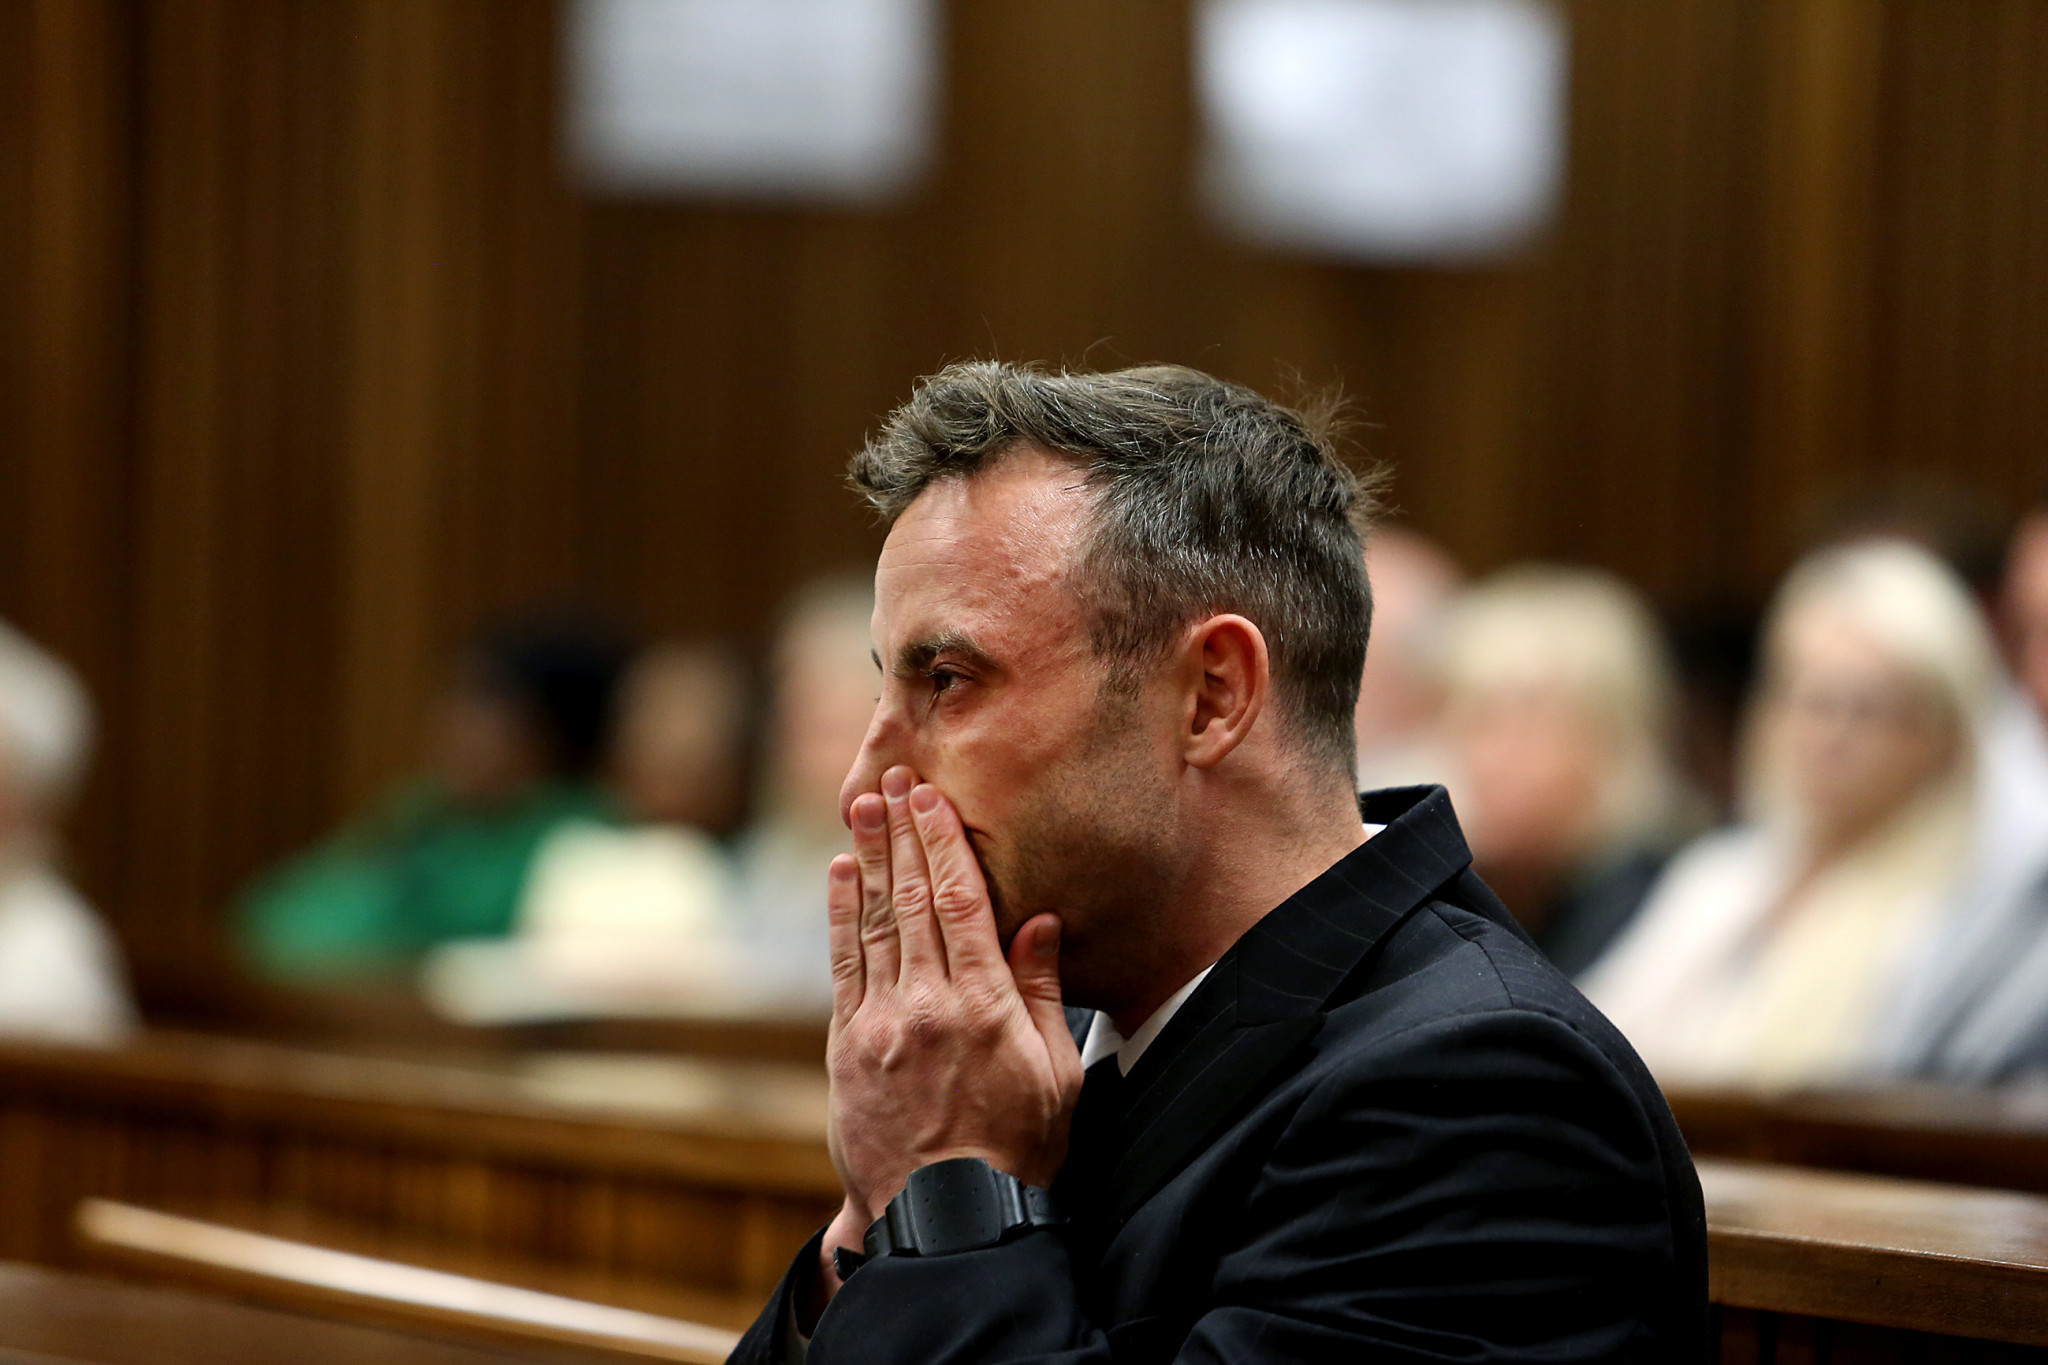 The six-time Paralympic Games gold medallist Oscar Pistorius is set to have a parole hearing on March 31 and could be released from prison having murdered his girlfriend Reeva Steenkamp 10 years ago ©Getty Images